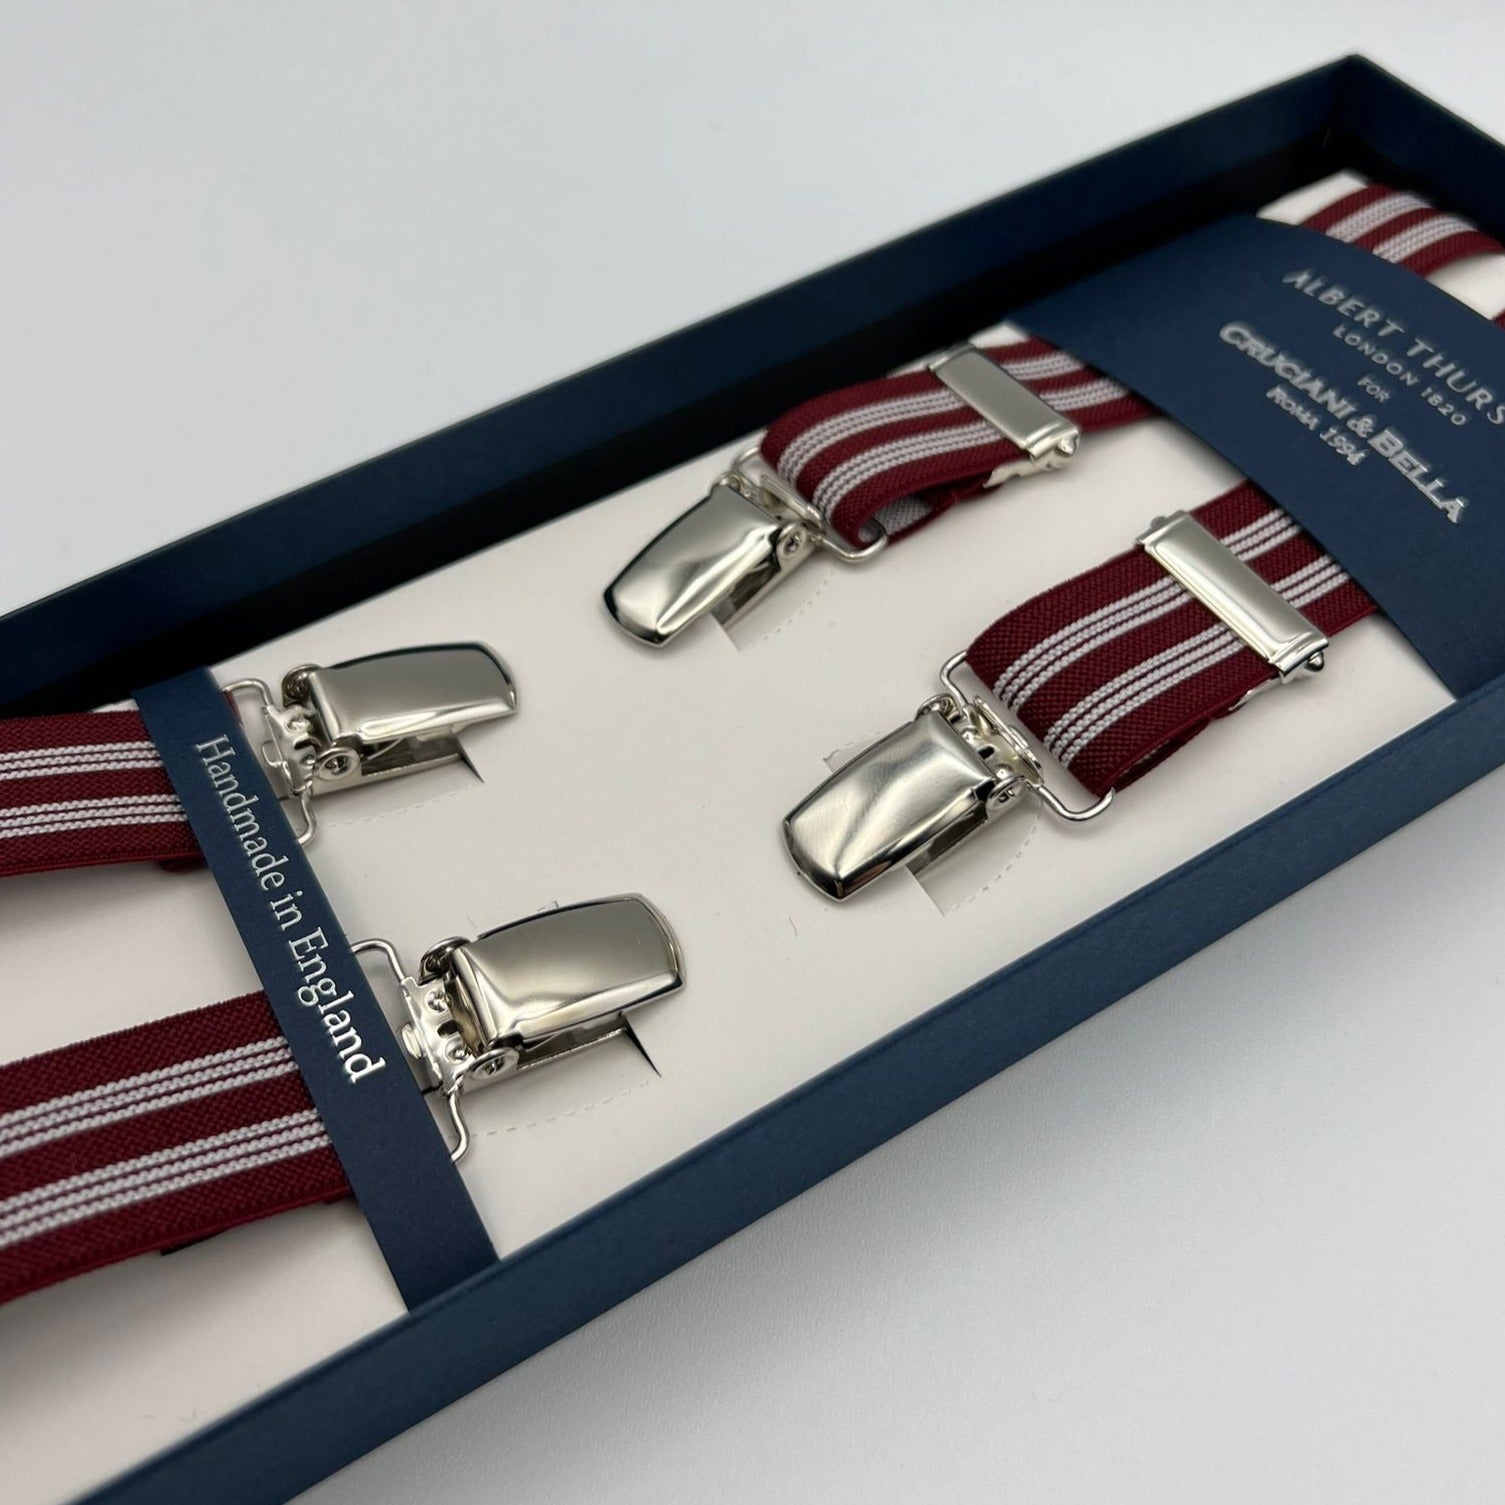 Albert Thurston for Cruciani & Bella Made in England Clip on Adjustable Sizing 25 mm elastic braces Red, White Stripes X-Shaped Nickel Fittings Size: L #7357